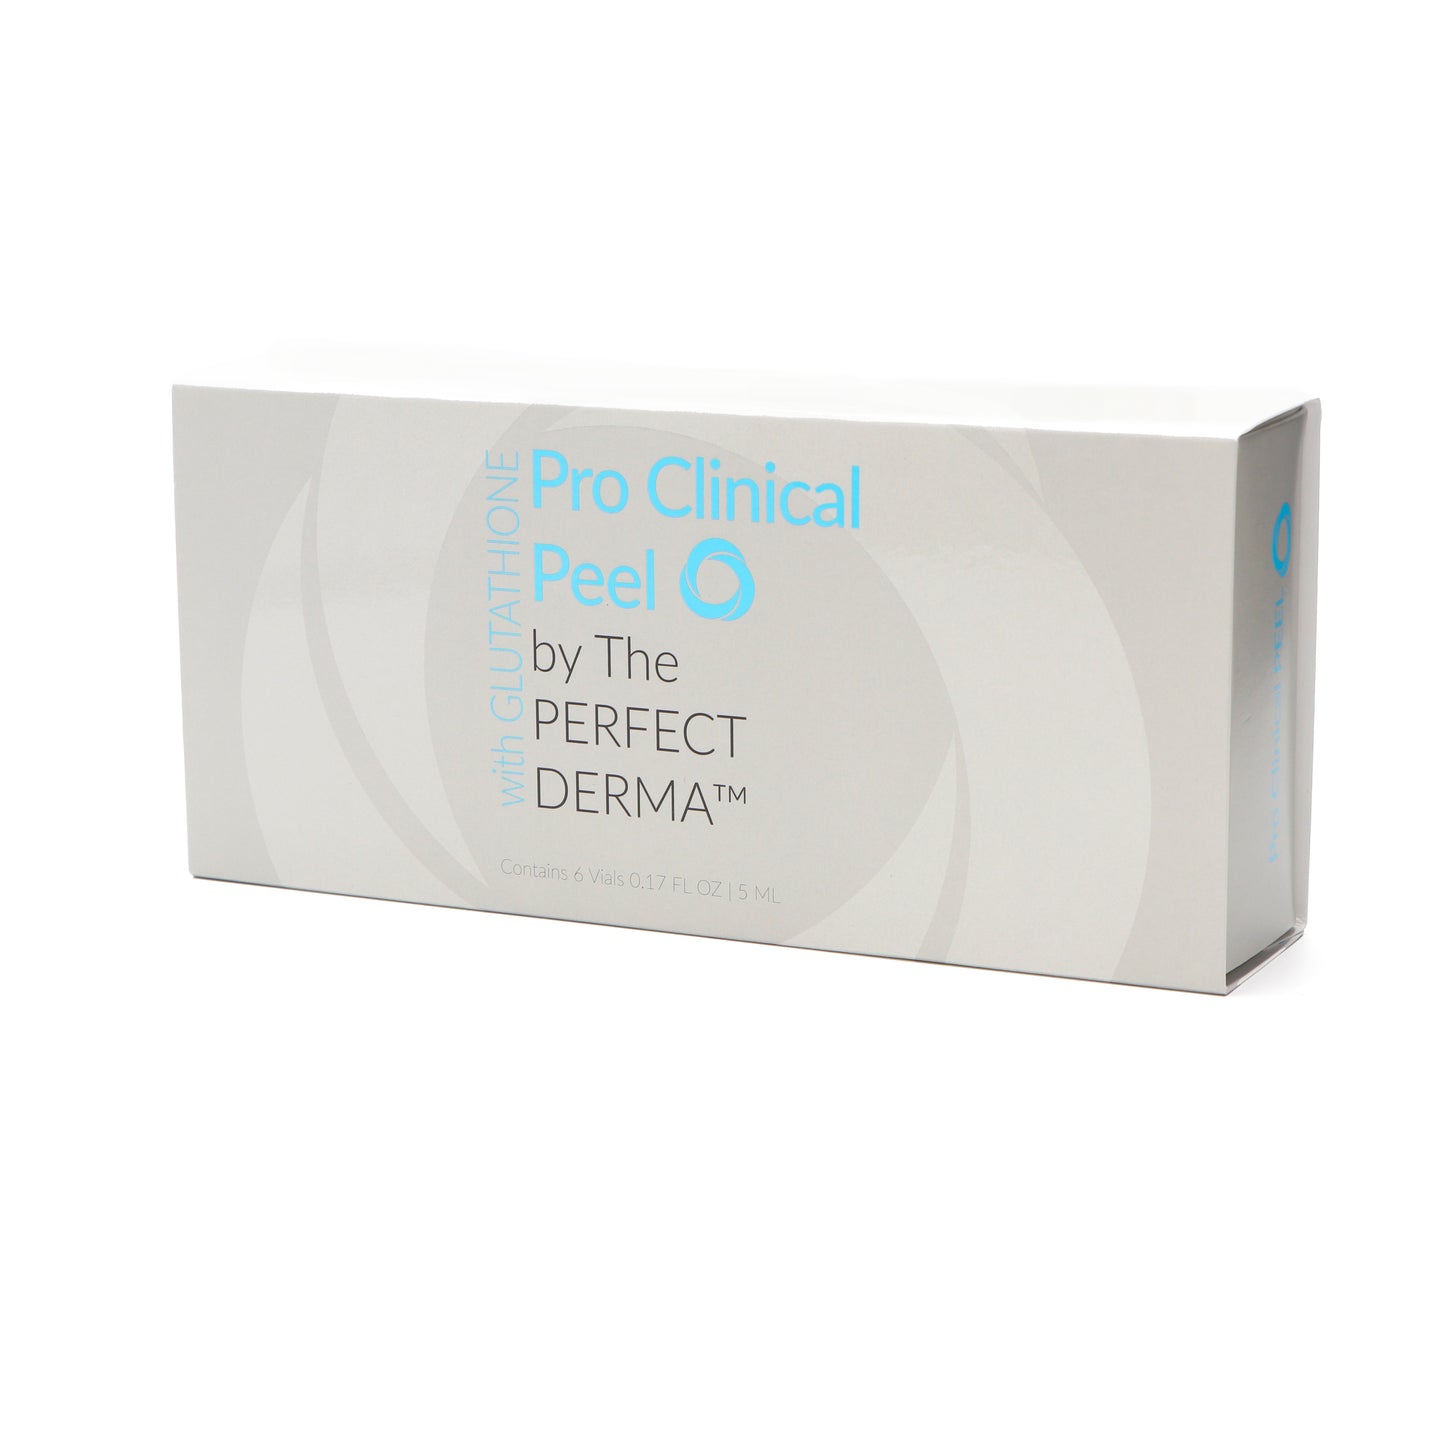 PRO CLINICAL PEEL with GLUTATHIONE